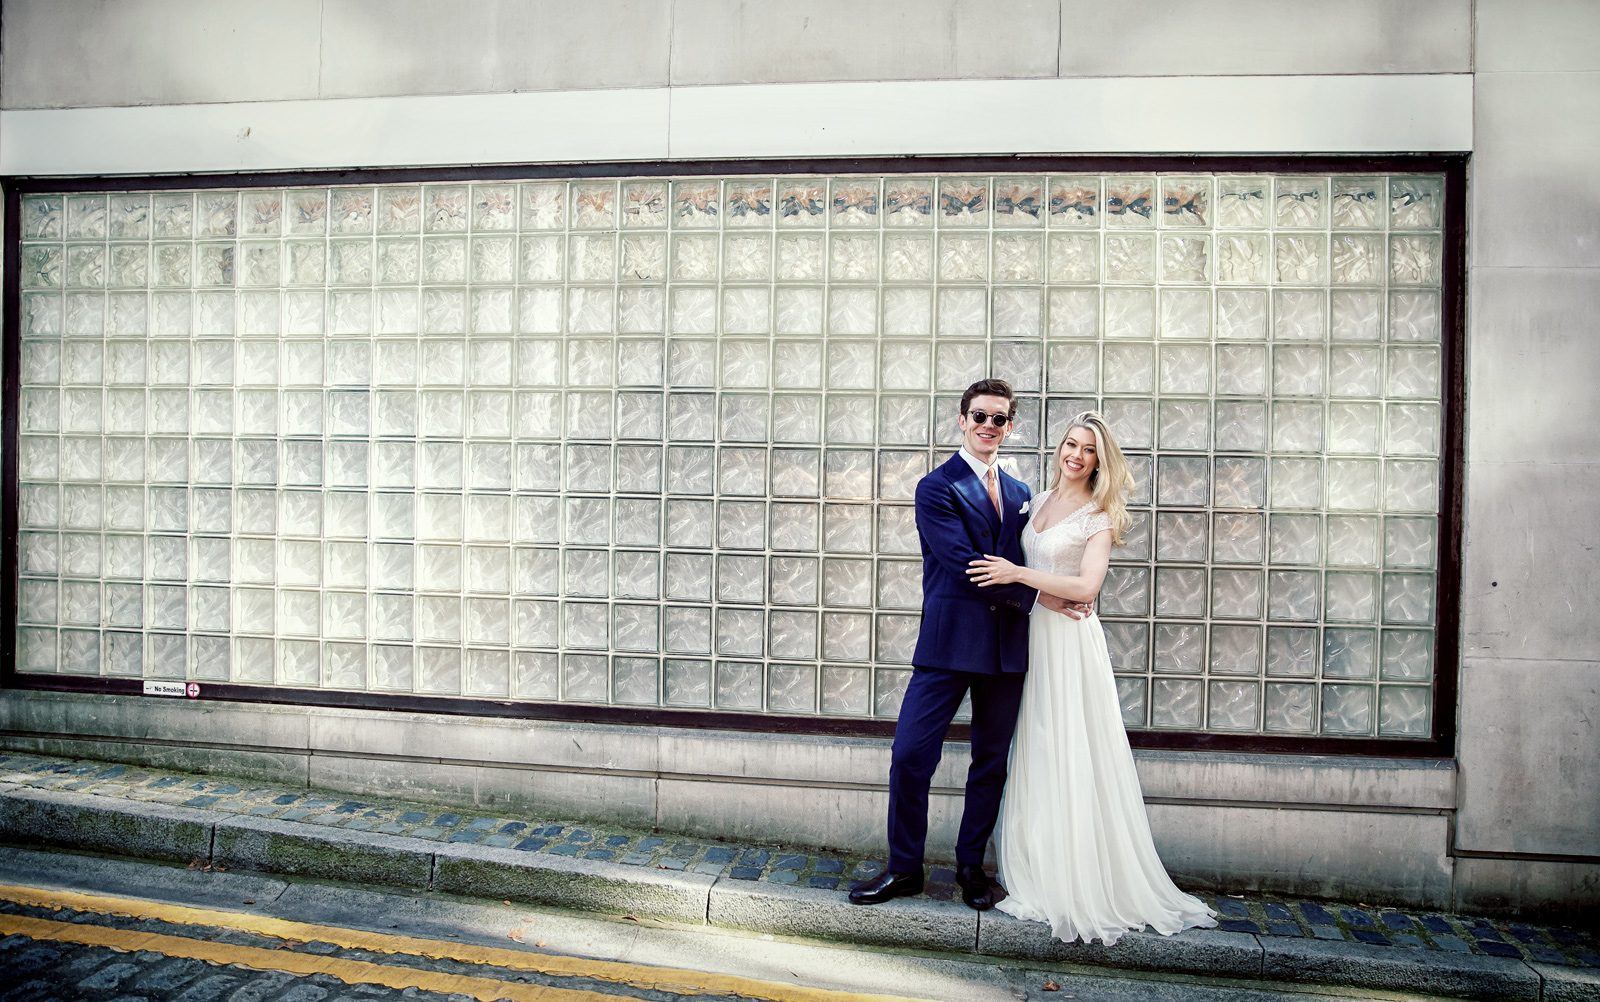 Islington wedding couple in front of glass wall image